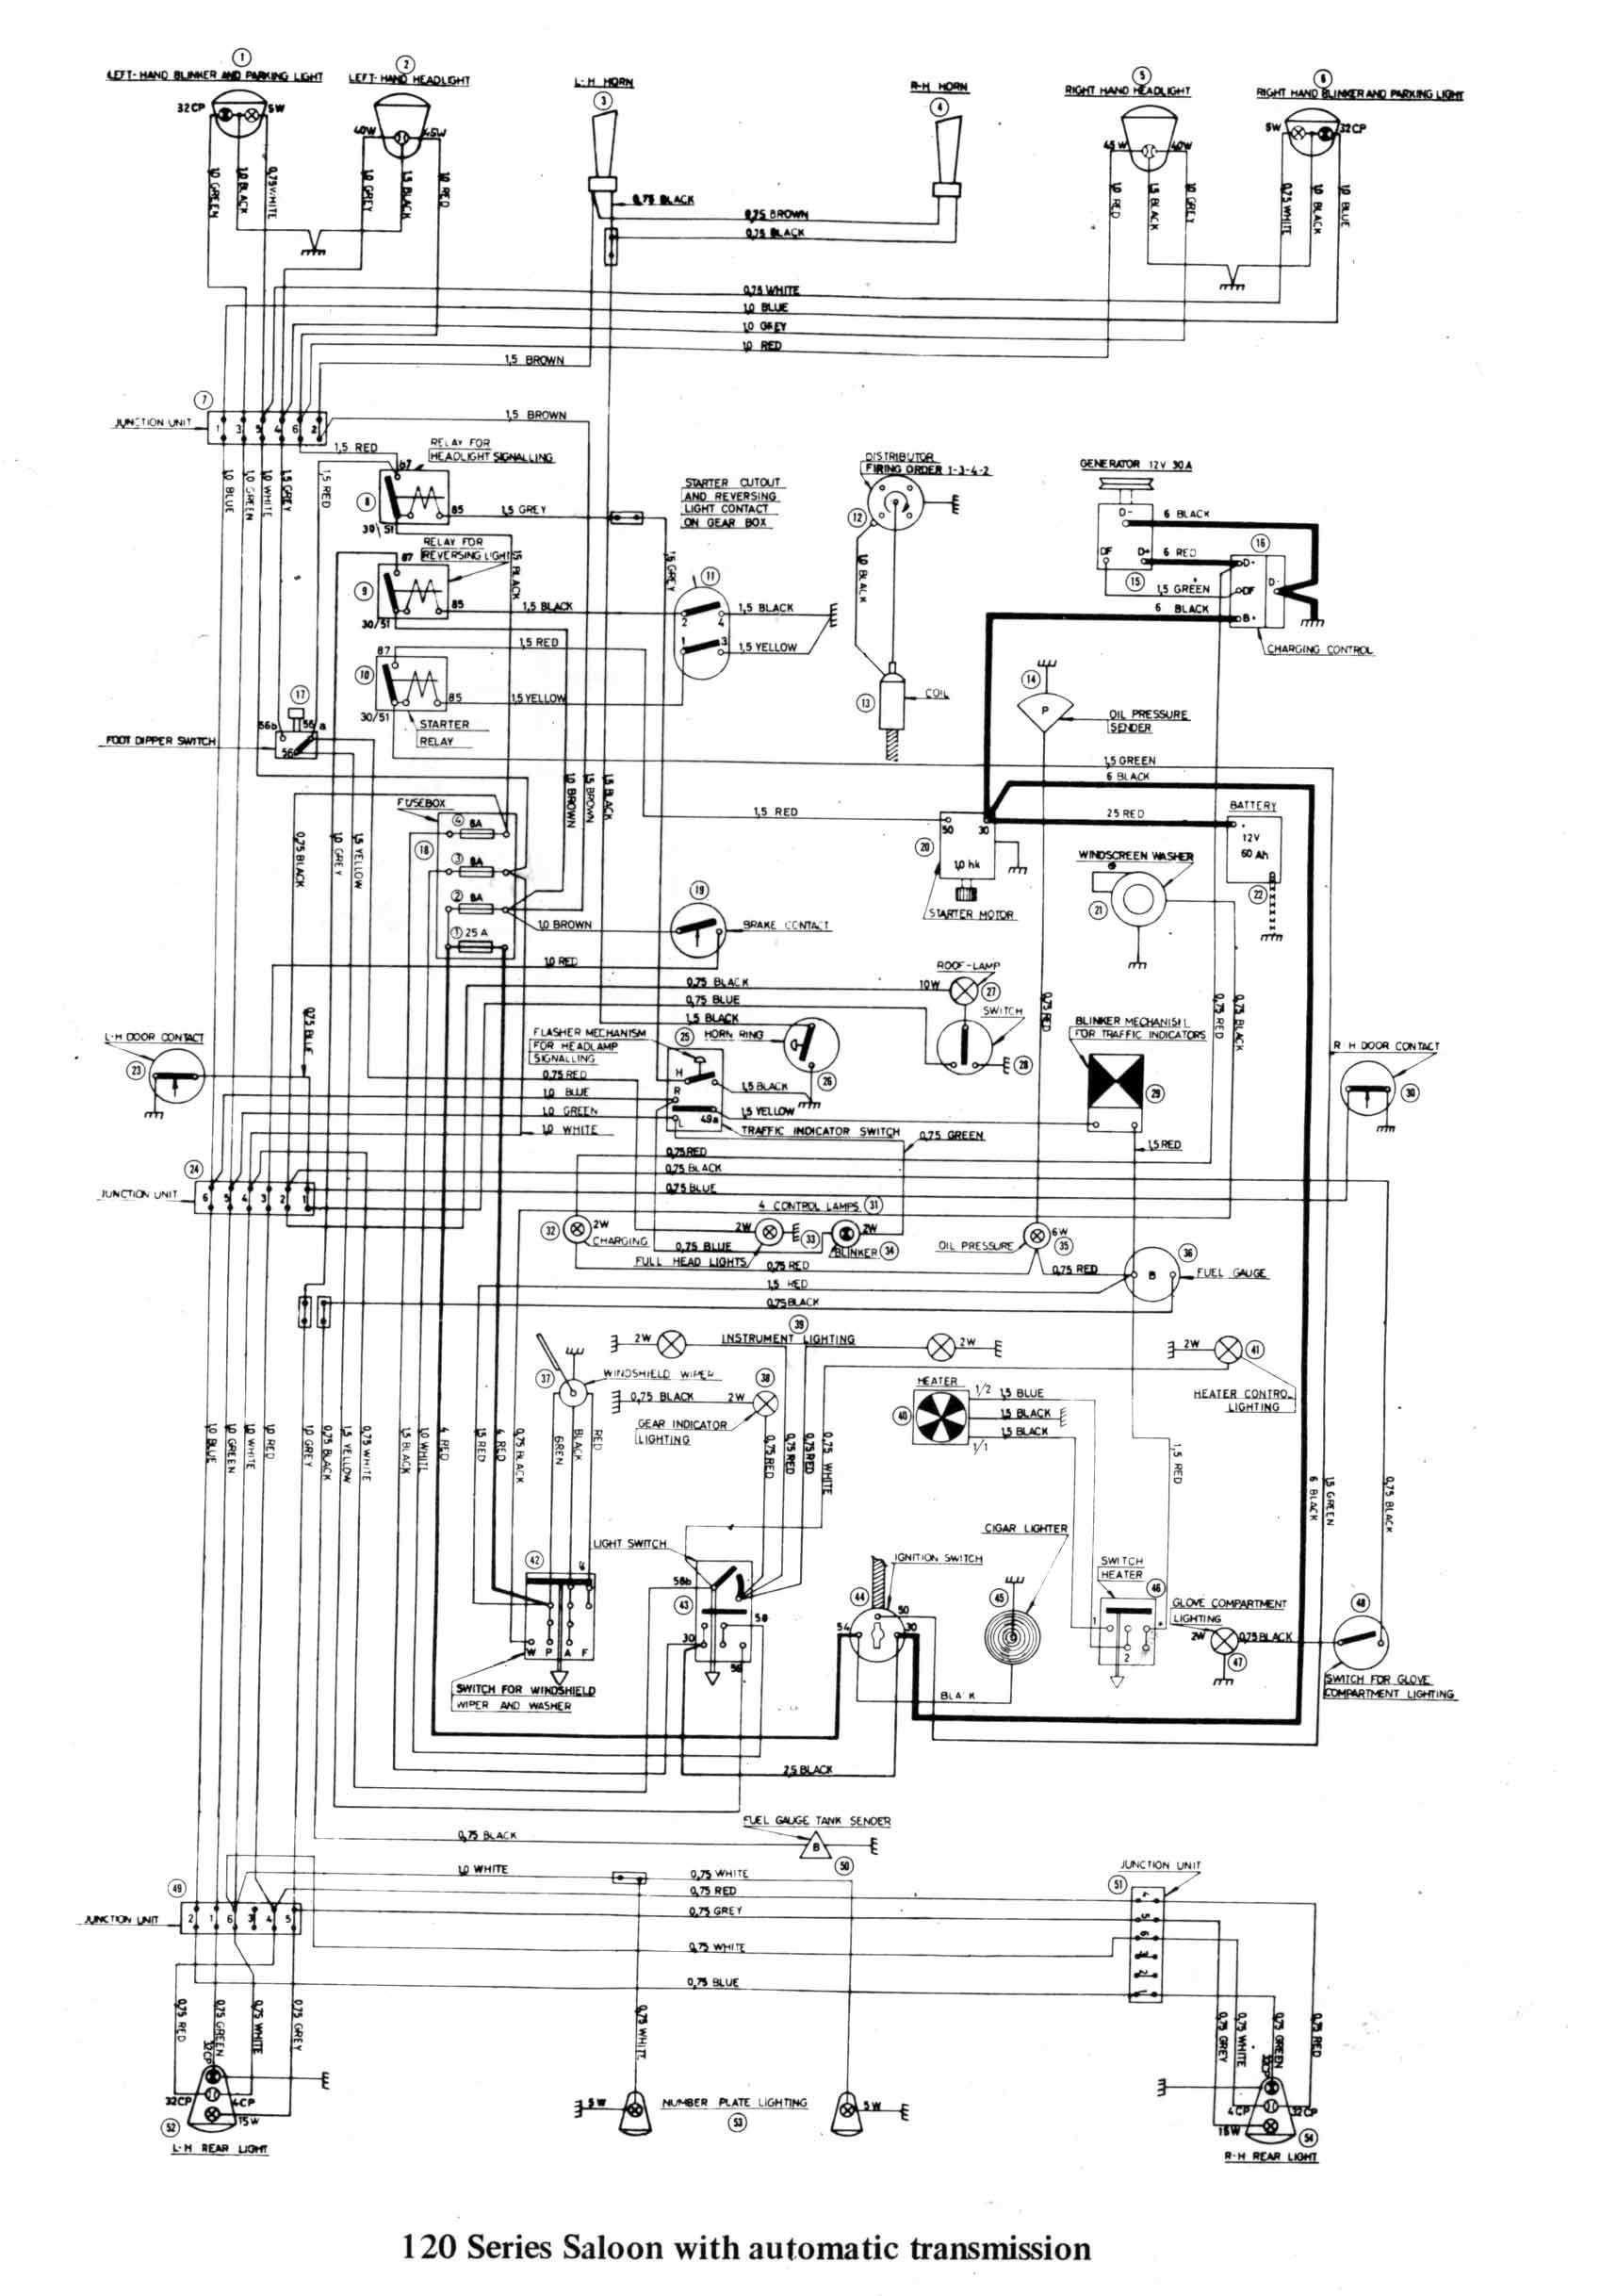 Hid Wiring Diagram with Relay New Wiring Diagram for Hid Relay New Relay Wire Diagram New